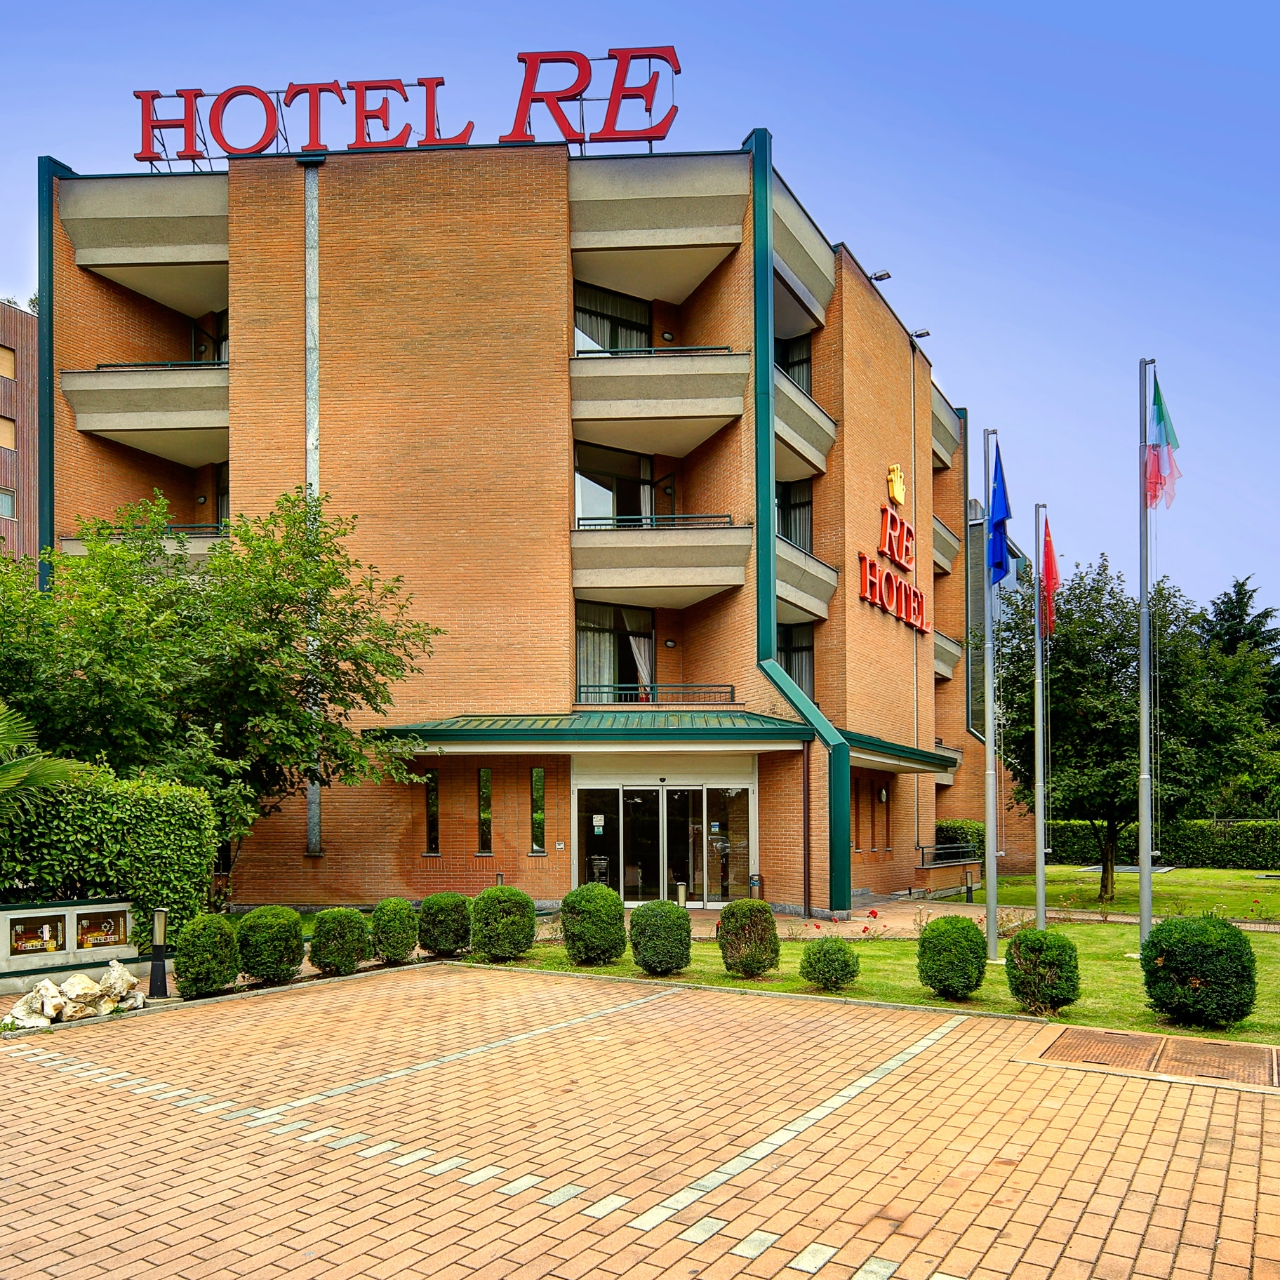 Hotel Milano Re - 4 HRS star hotel in Cinisello Balsamo (Lombardy)